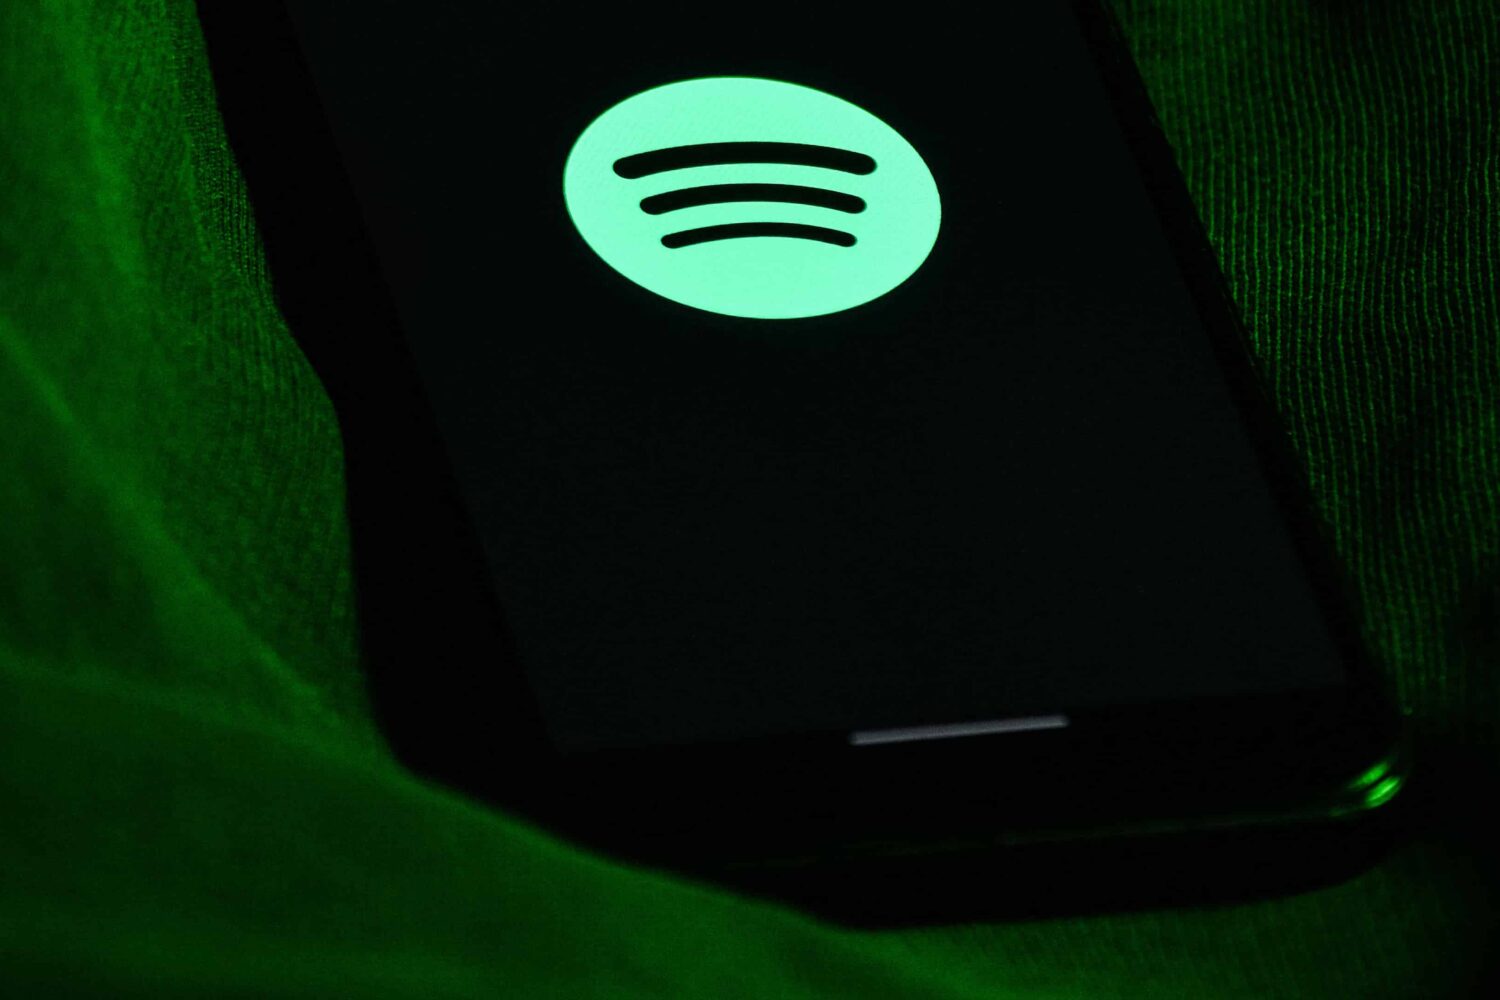 A photograph showing a back iPhone with a green Spotify logo displayed on the screen, laid on its back on a piece of green fabric